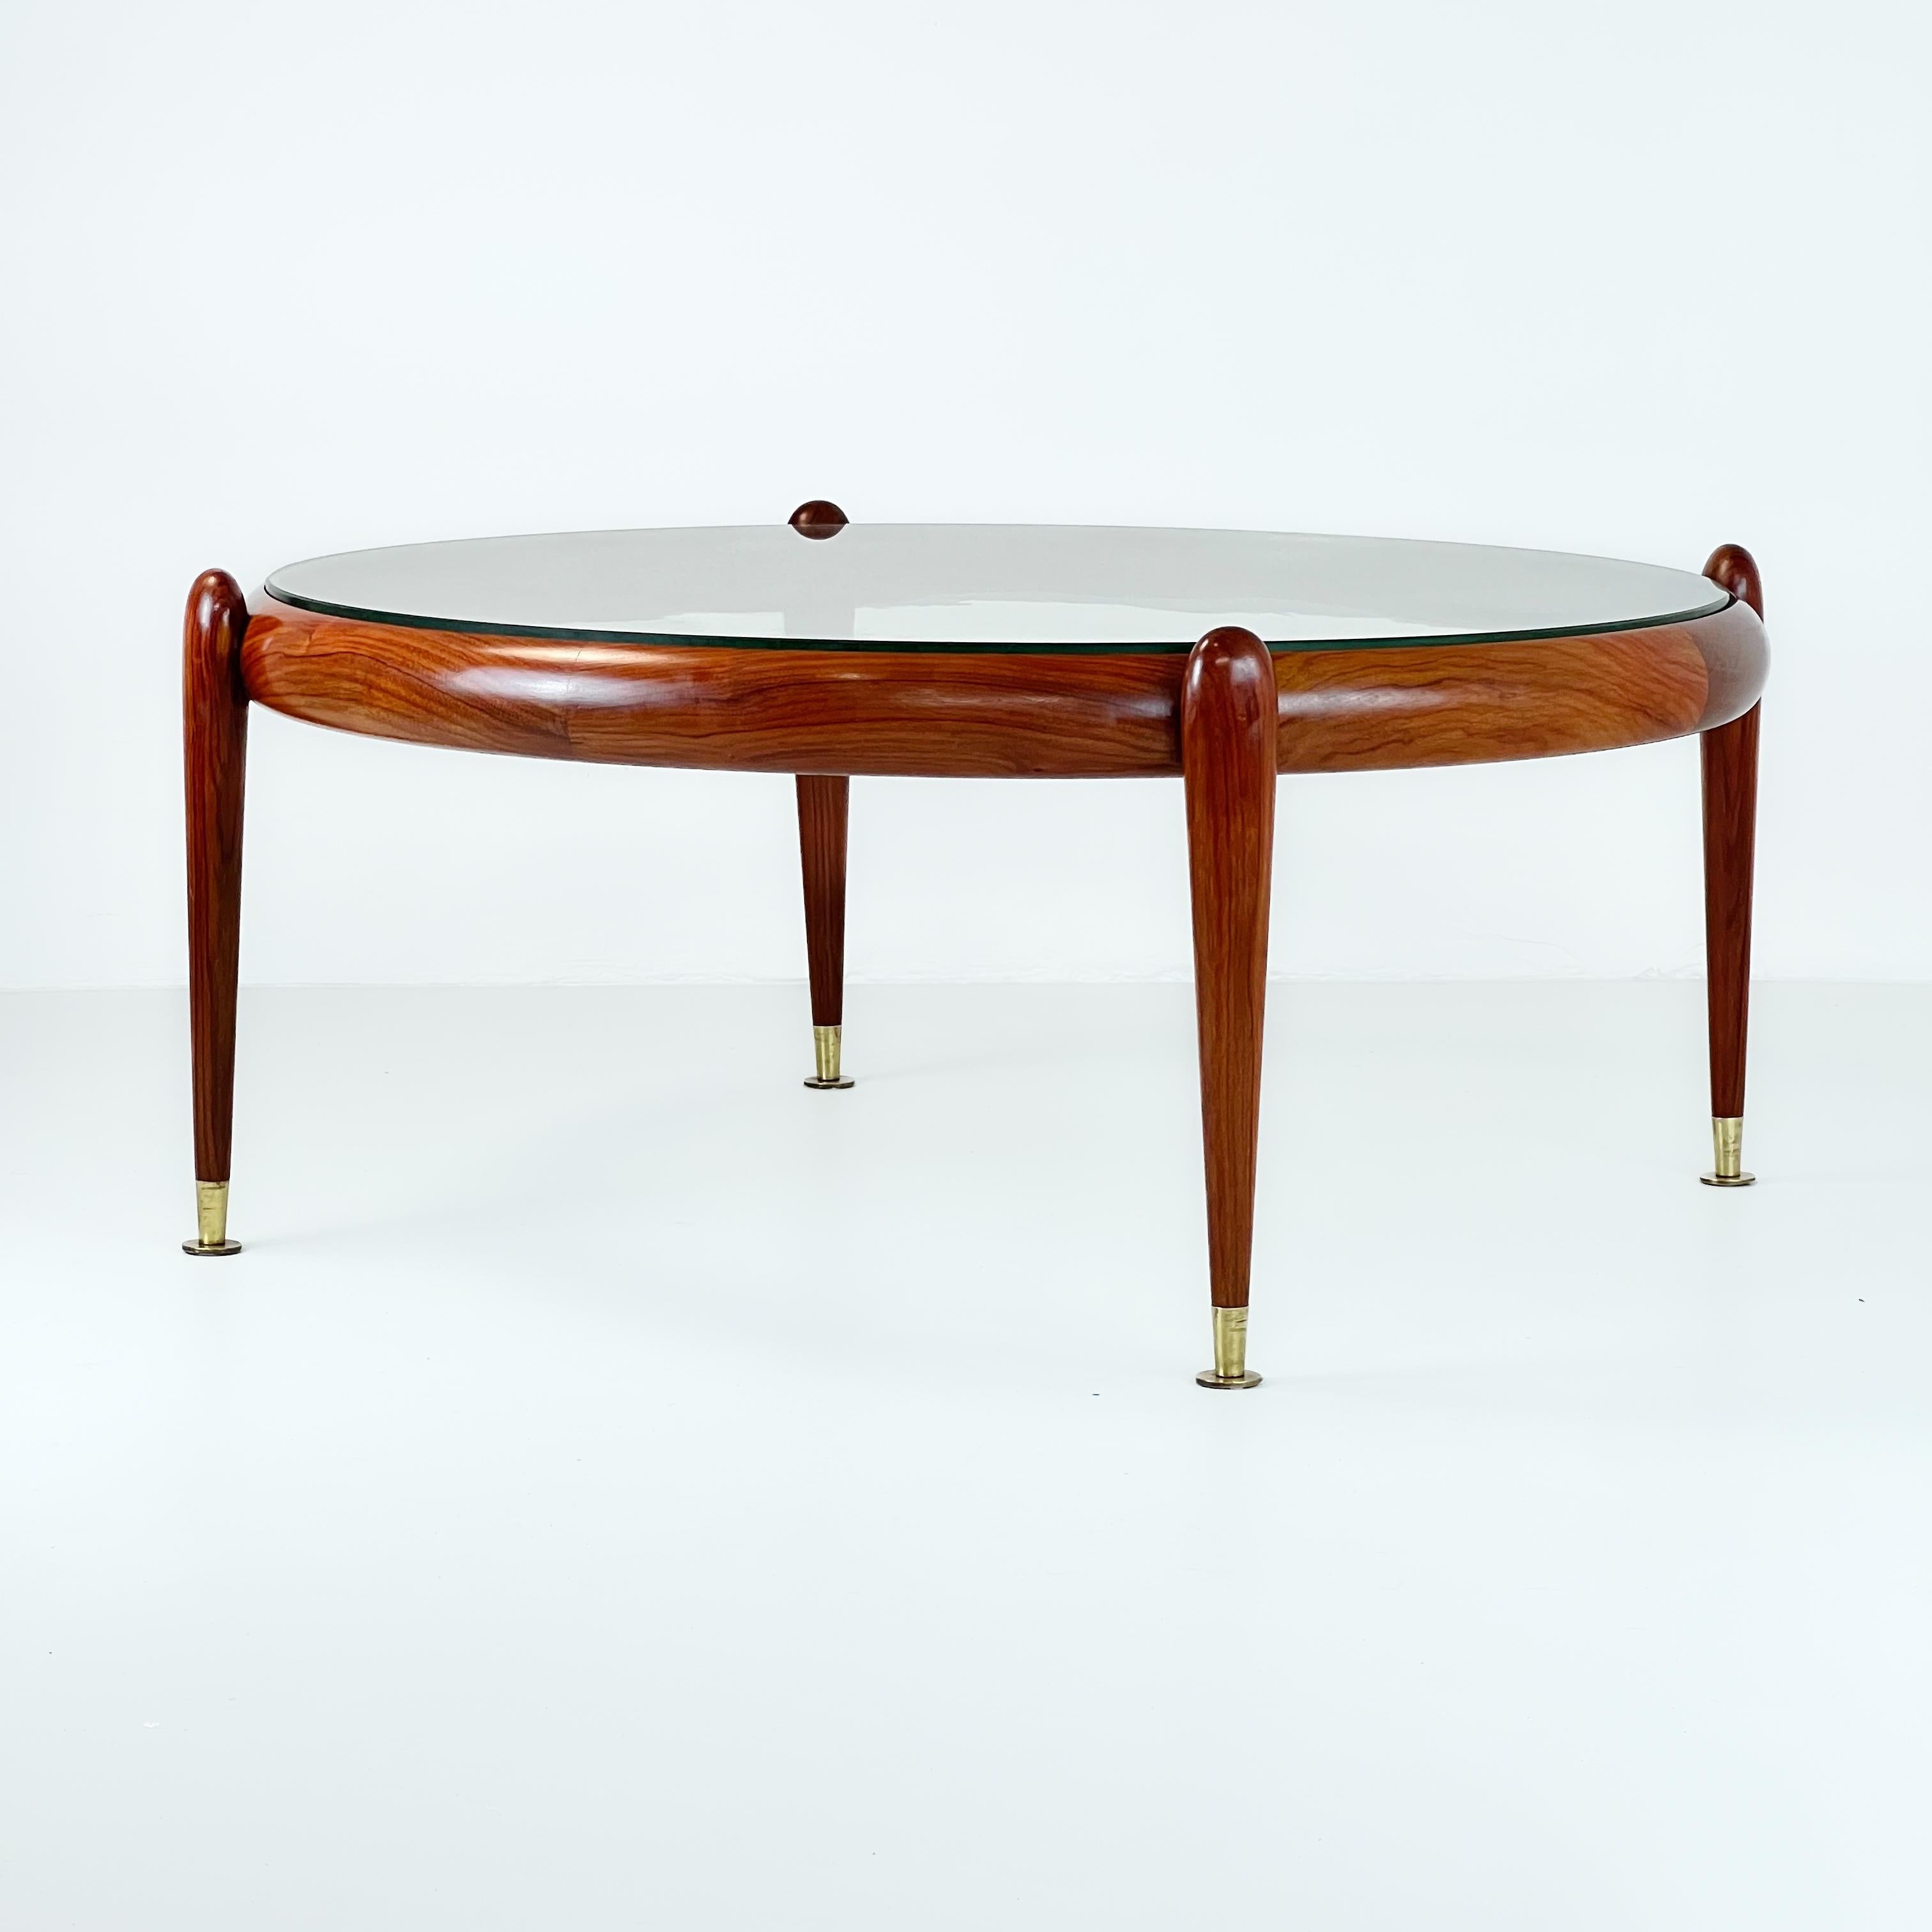 Beautiful center table designed by Giussepe Scapinelli, in caviuna rosewood and brass, Brazil, 1960.

The restoration process only needed refinishing, which was done by our team at the finest details and preserving the originality from that